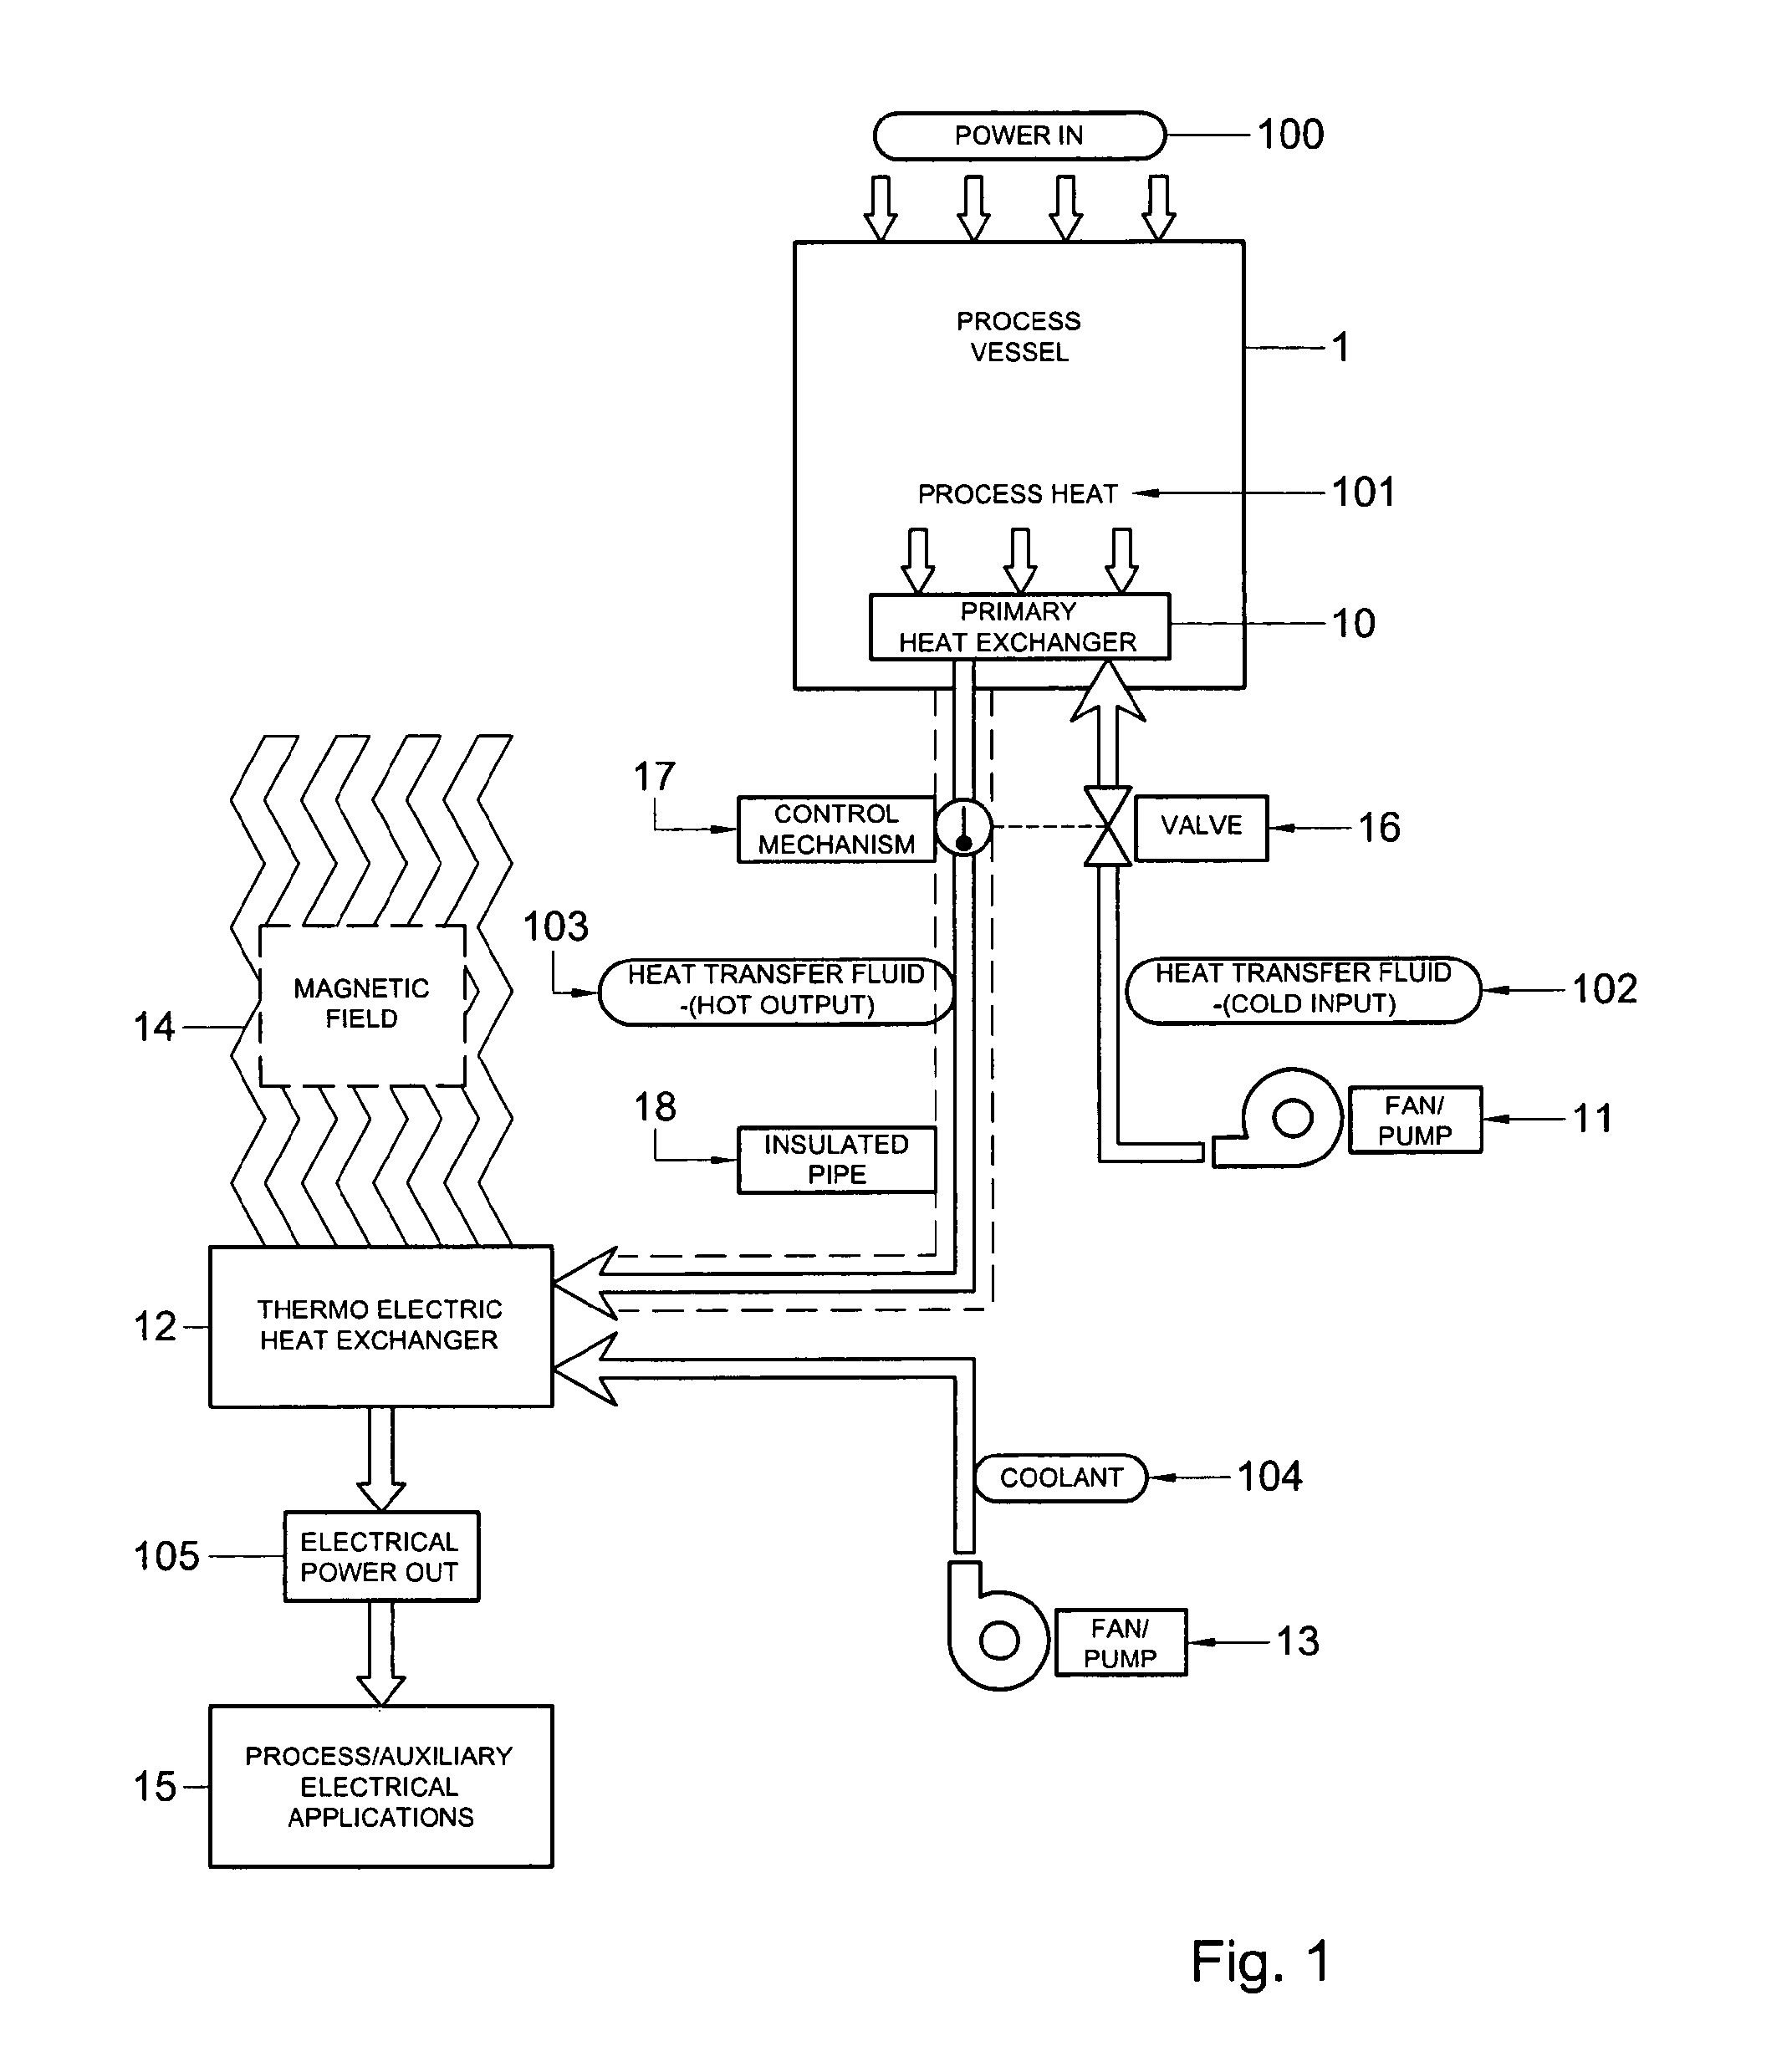 Heat recovery system for pyrometallurgical vessel using thermoelectric/thermomagnetic devices